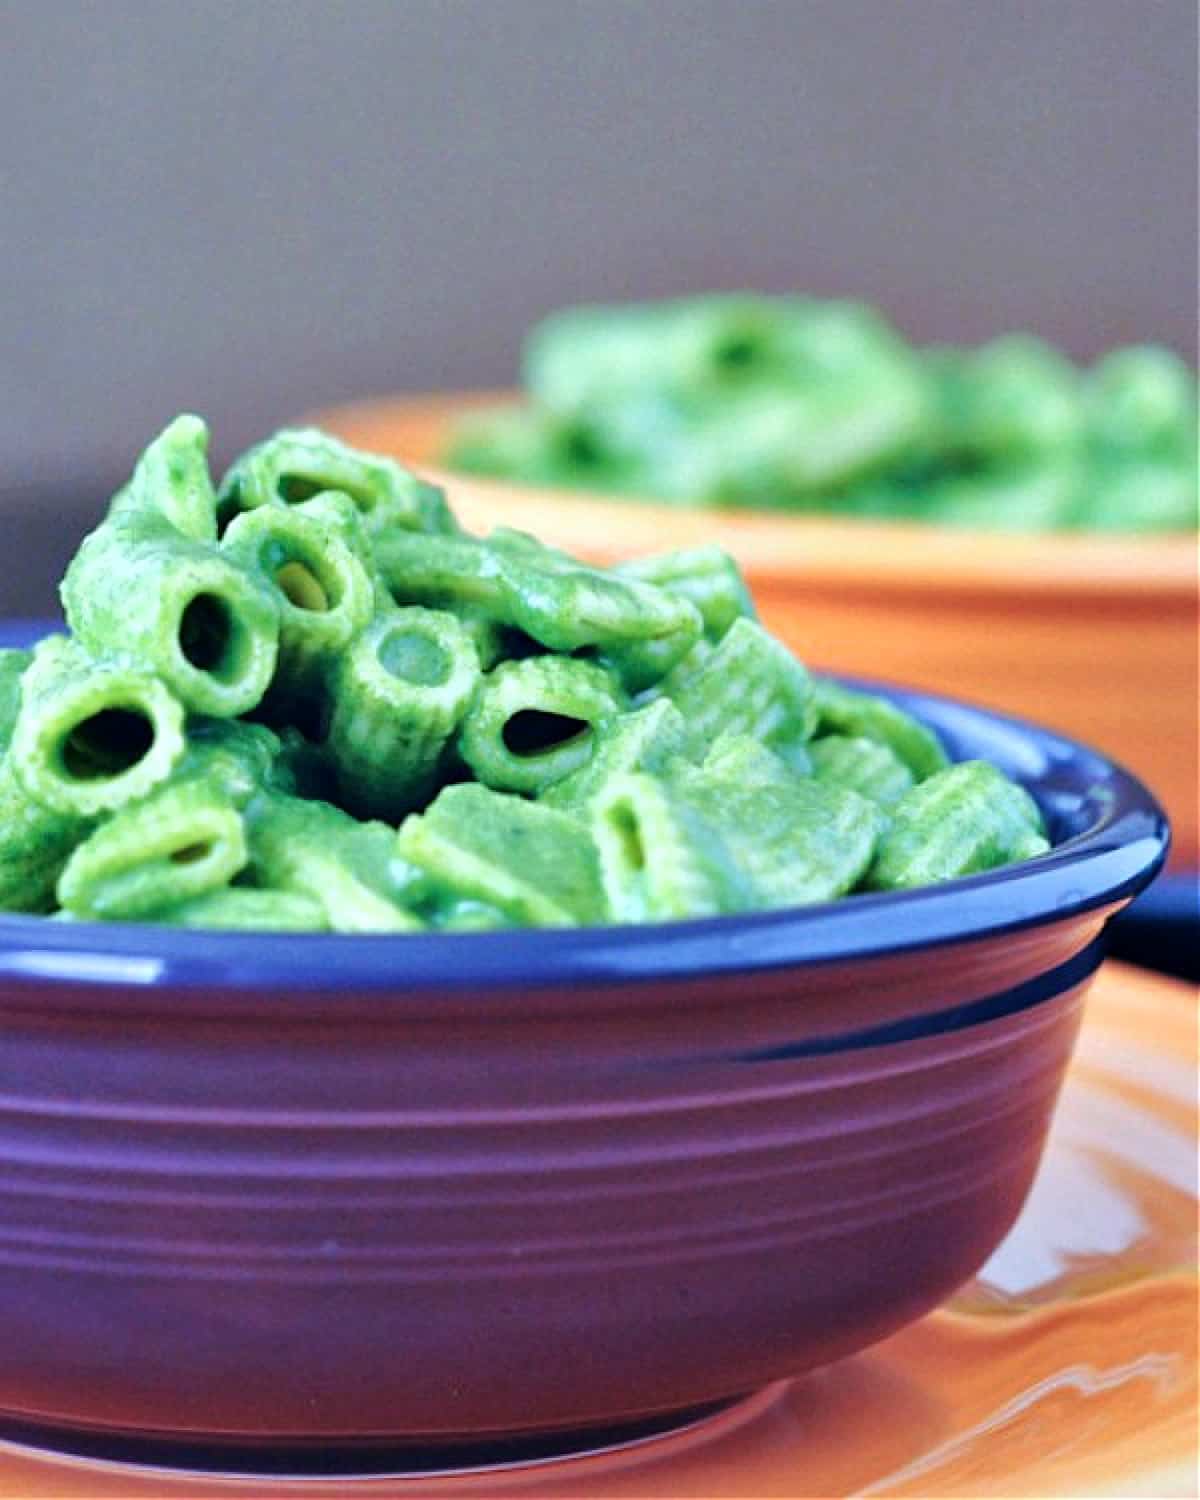 a bowl of green mac and cheese (made by adding spinach to cheese sauce)